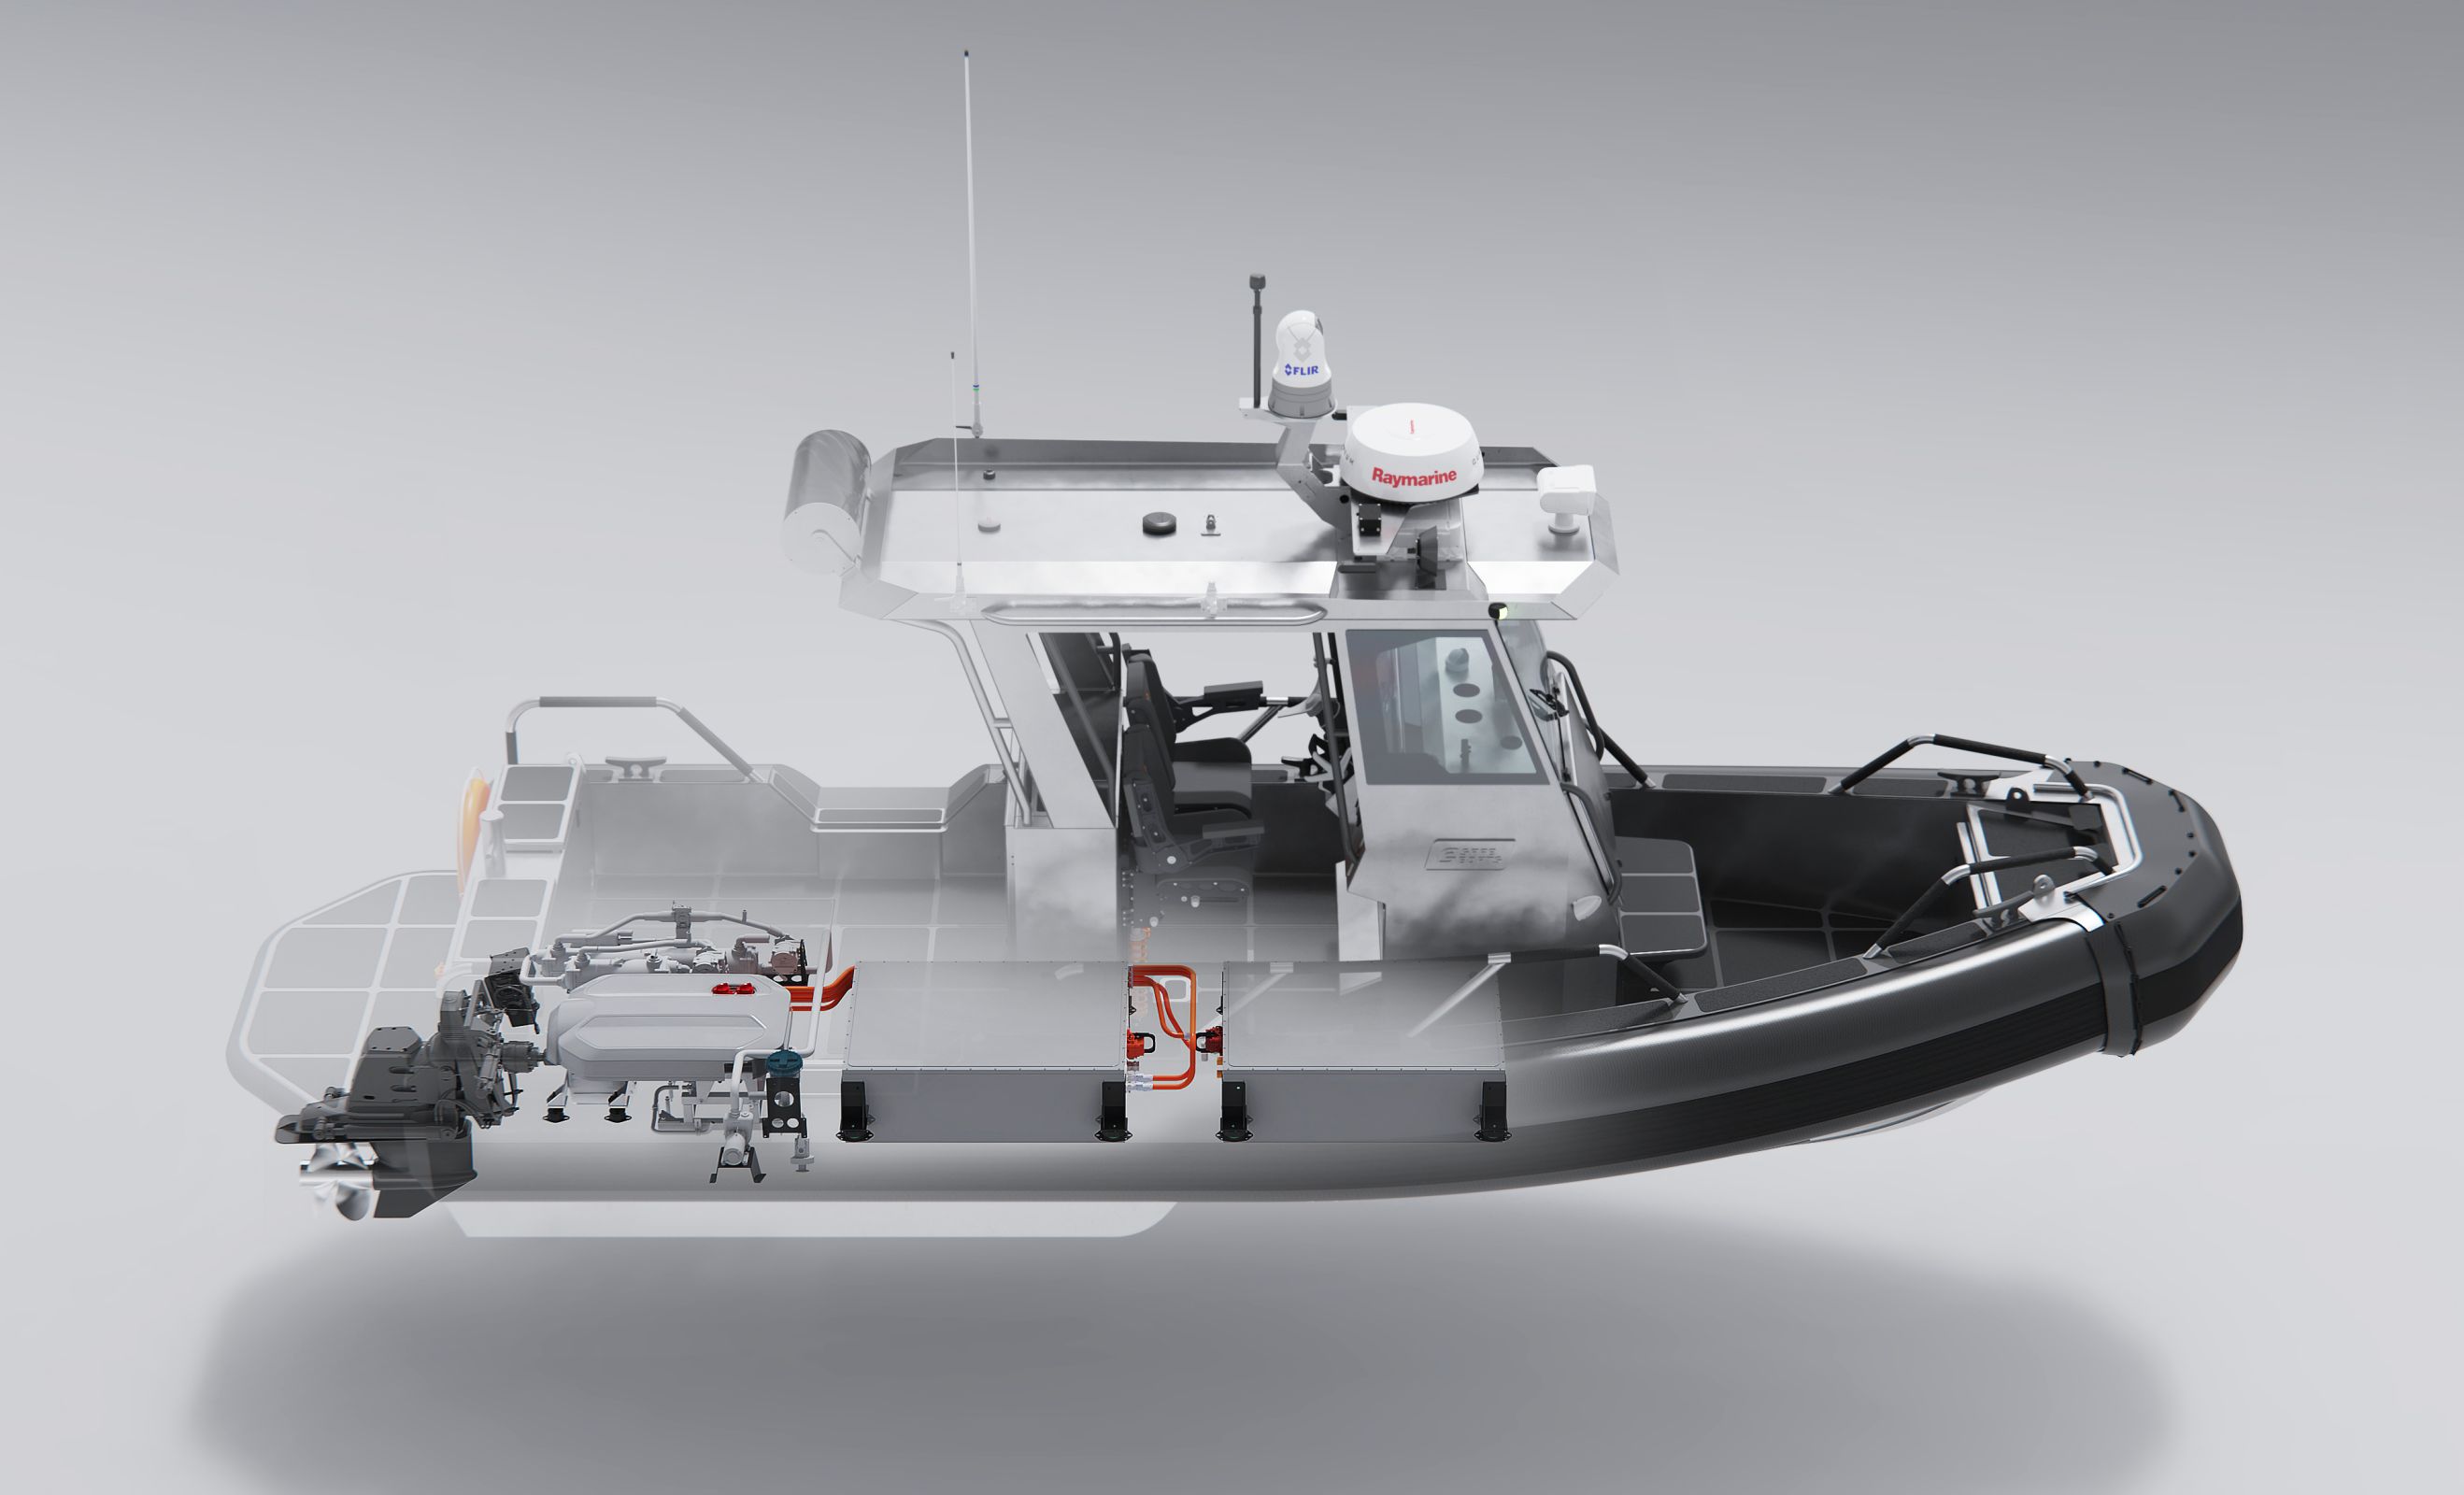 SAFE Boats and Vita Power Enter into an MOU to Build Zero-Emission Patrol Boat Options Main Photo